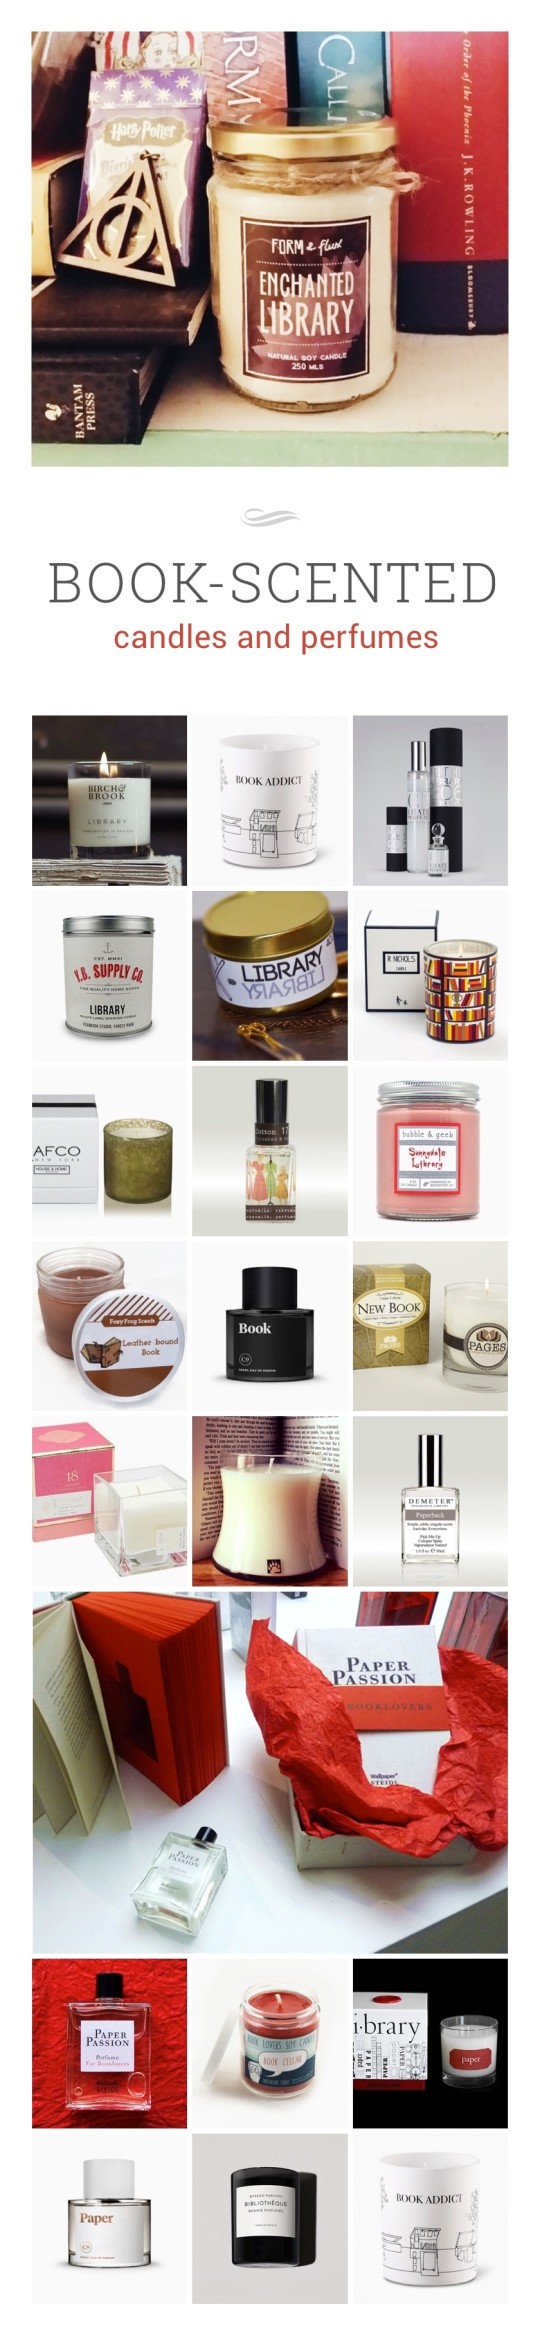 Best book-scented candles and perfumes #infographic